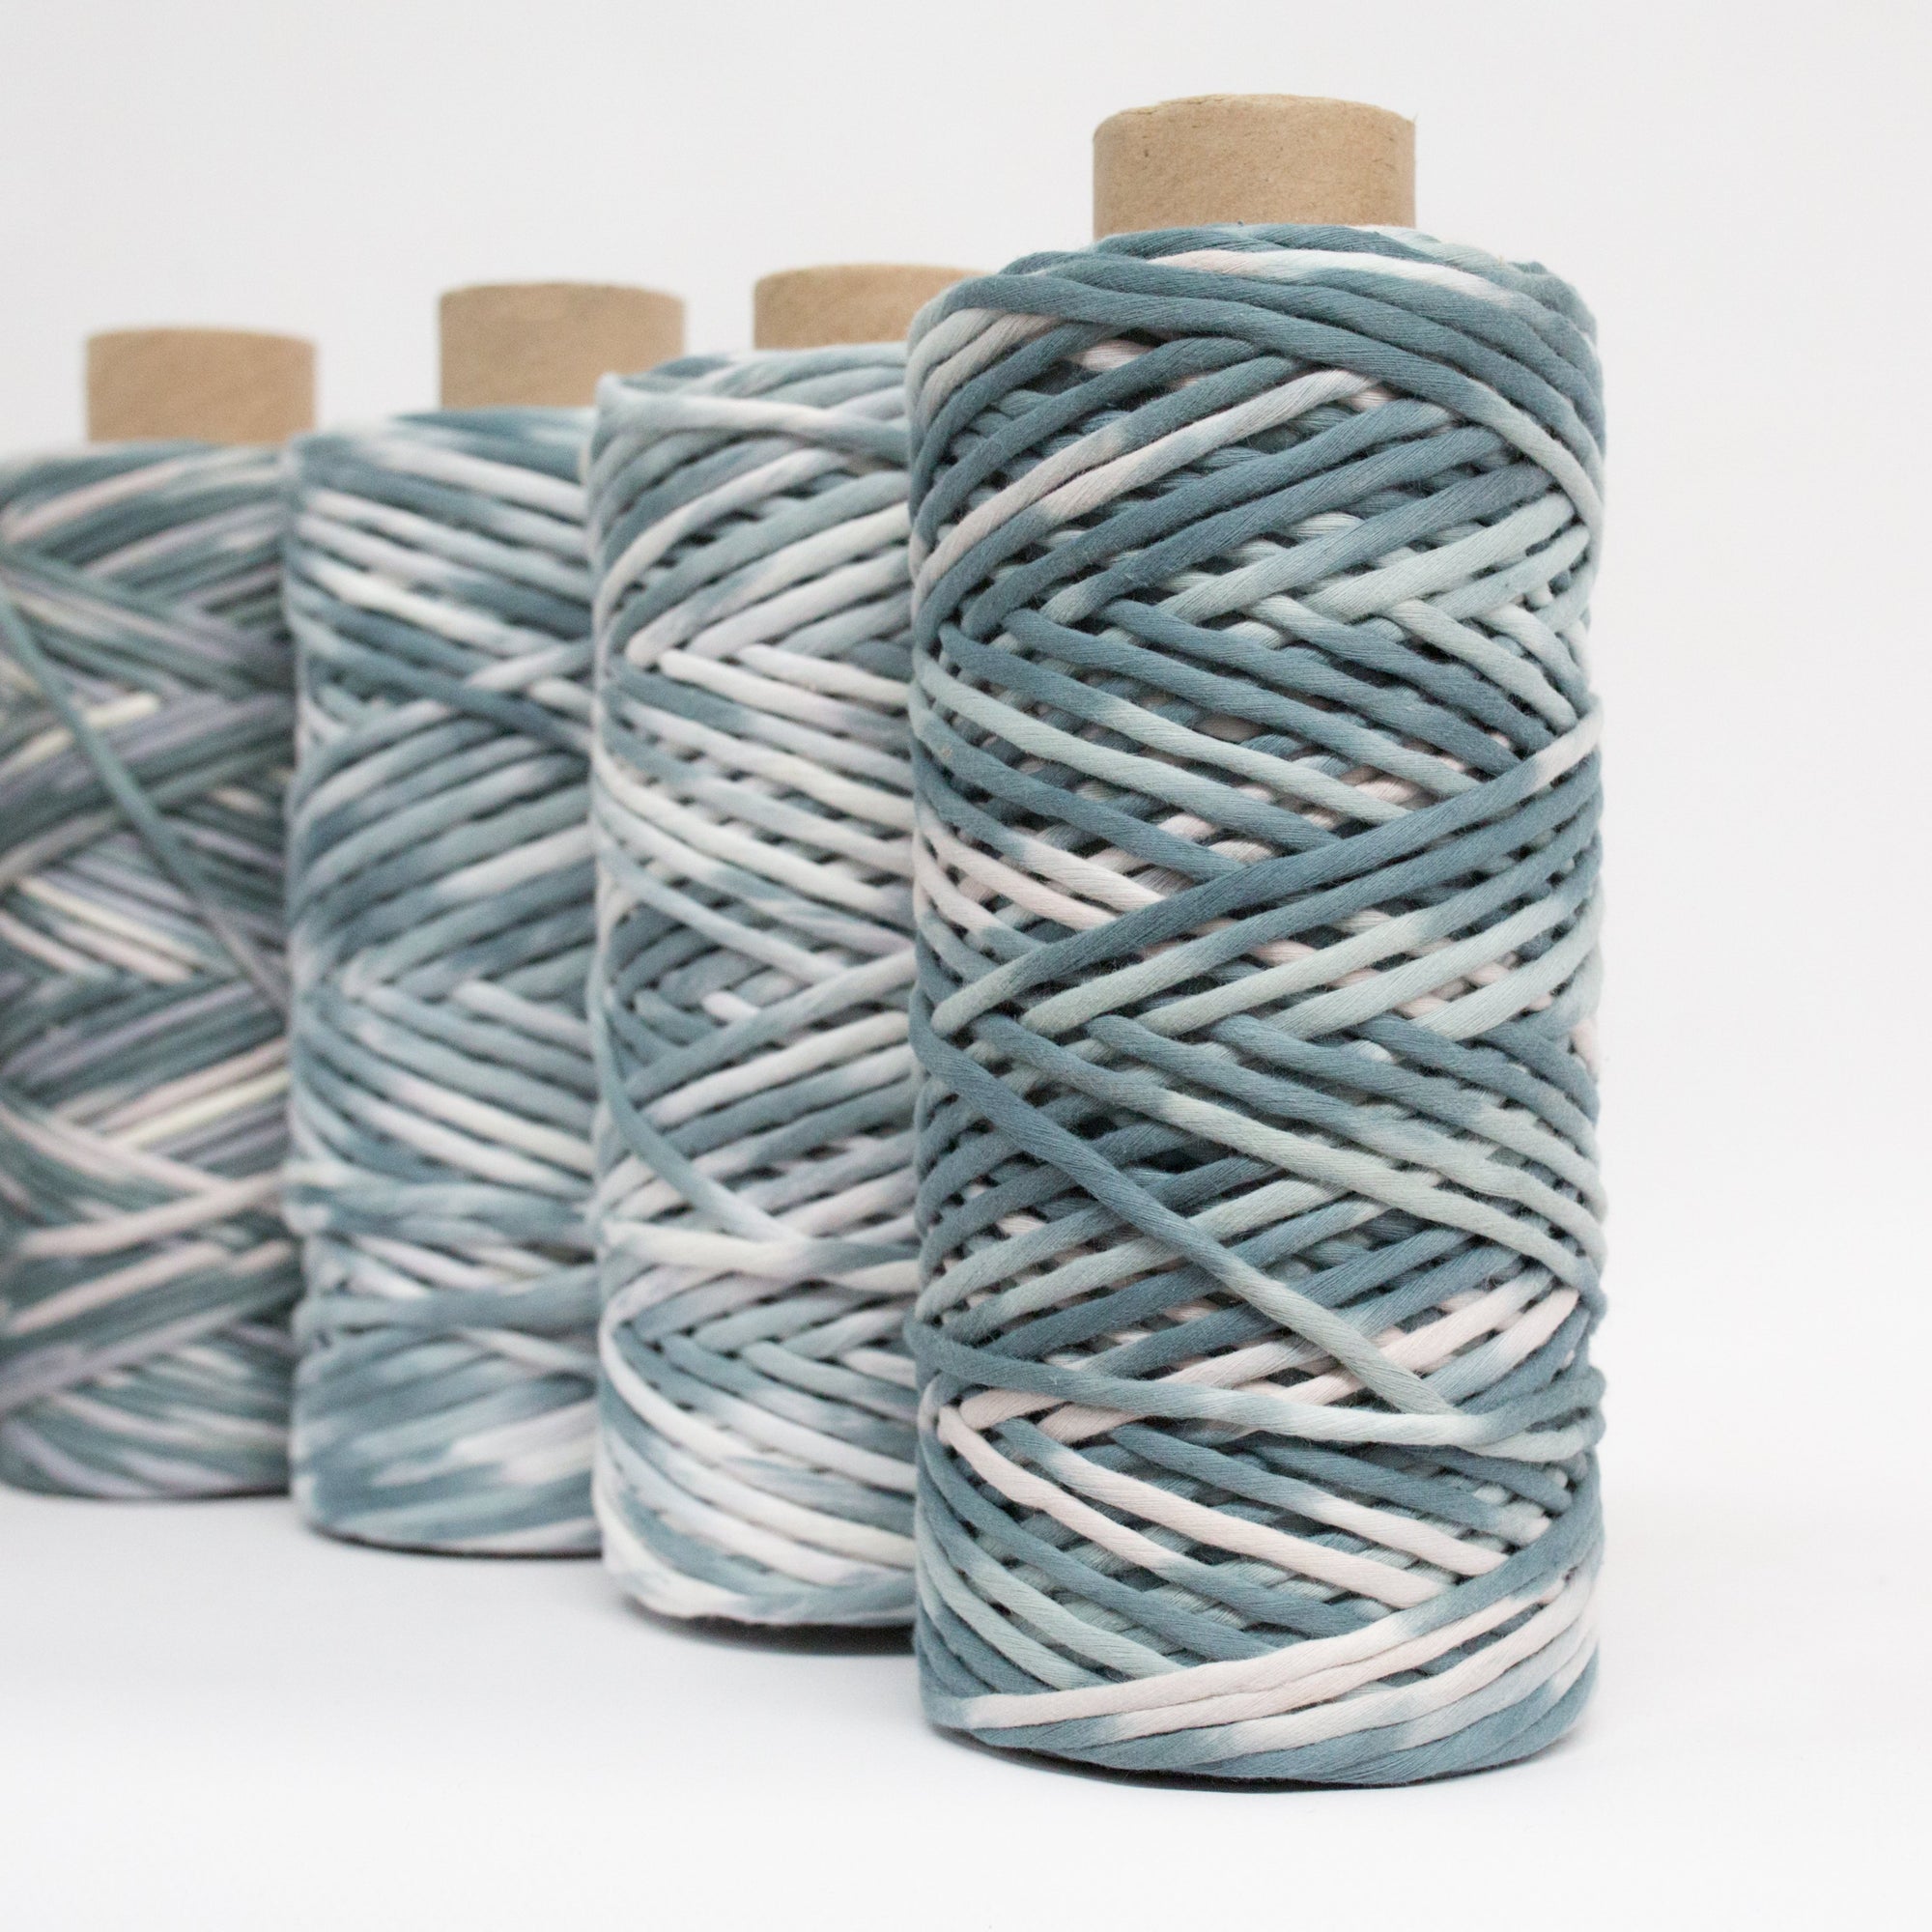 Mary Maker Studio Cloud 9 Cotton 500g Hand Painted Macrame String // River Green macrame cotton macrame rope macrame workshop macrame patterns macrame